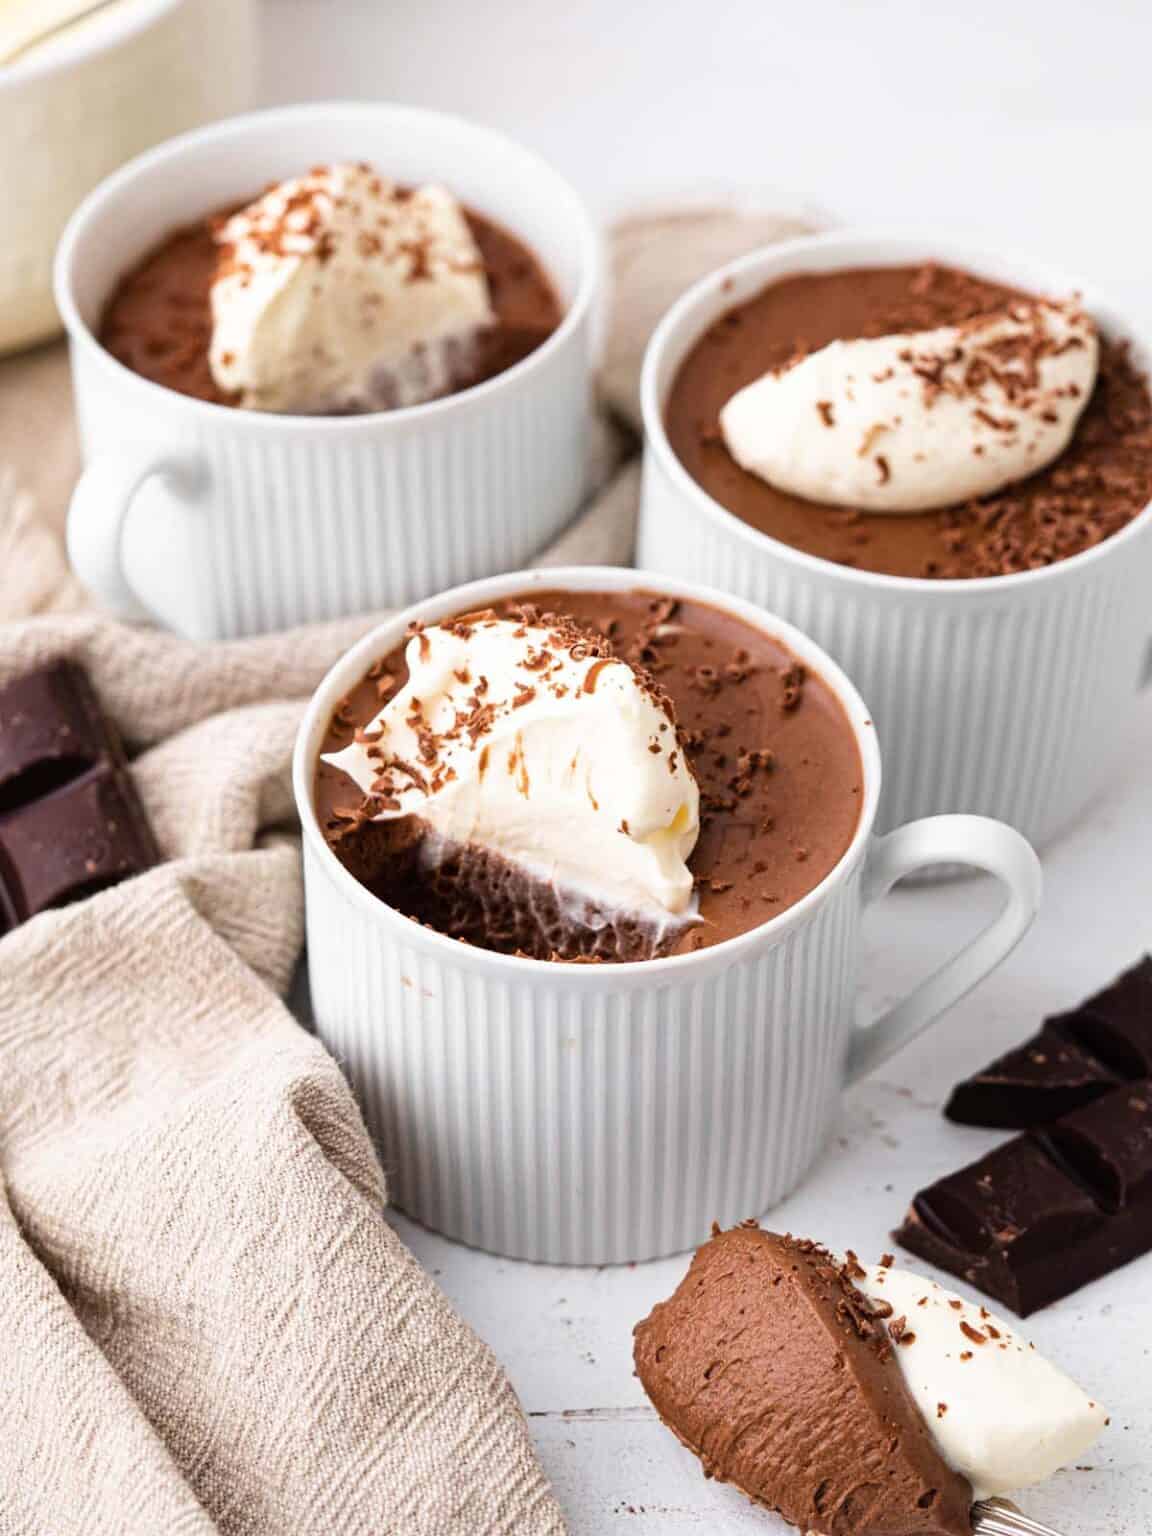 Easy Chocolate Mousse - Catherine Zhang